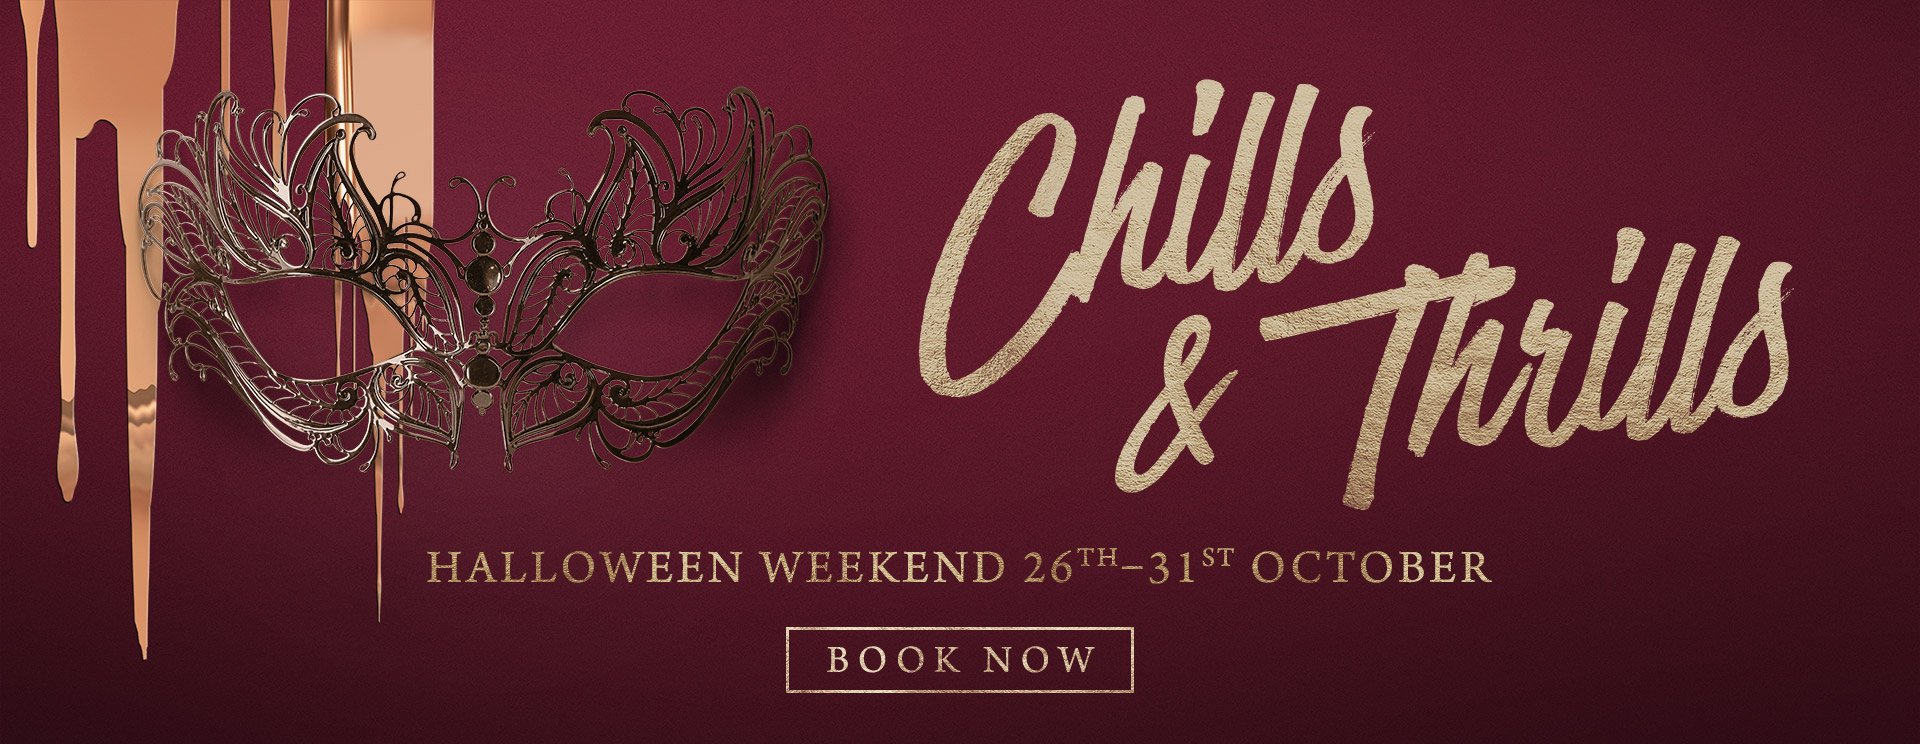 Chills & Thrills this Halloween at The Salisbury Arms